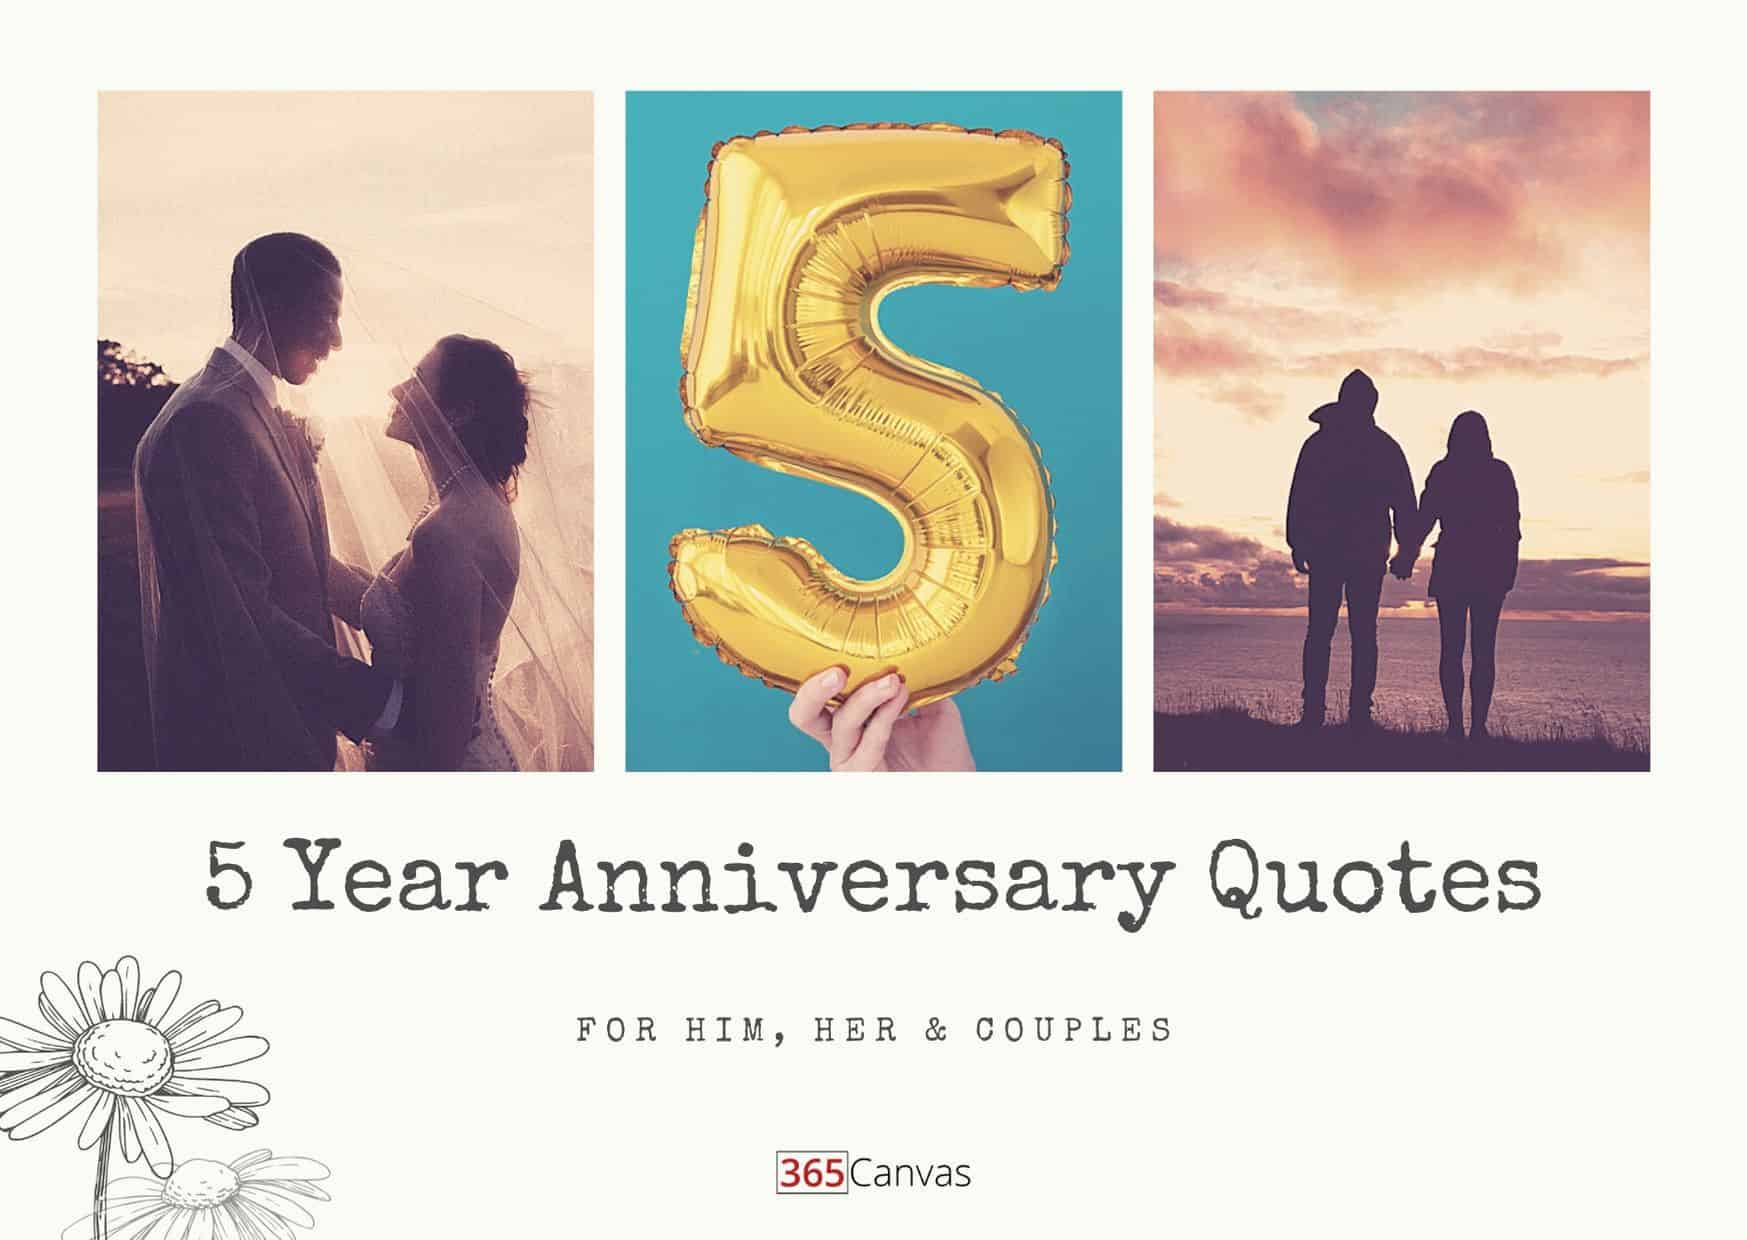 Two years of togetherness quotes